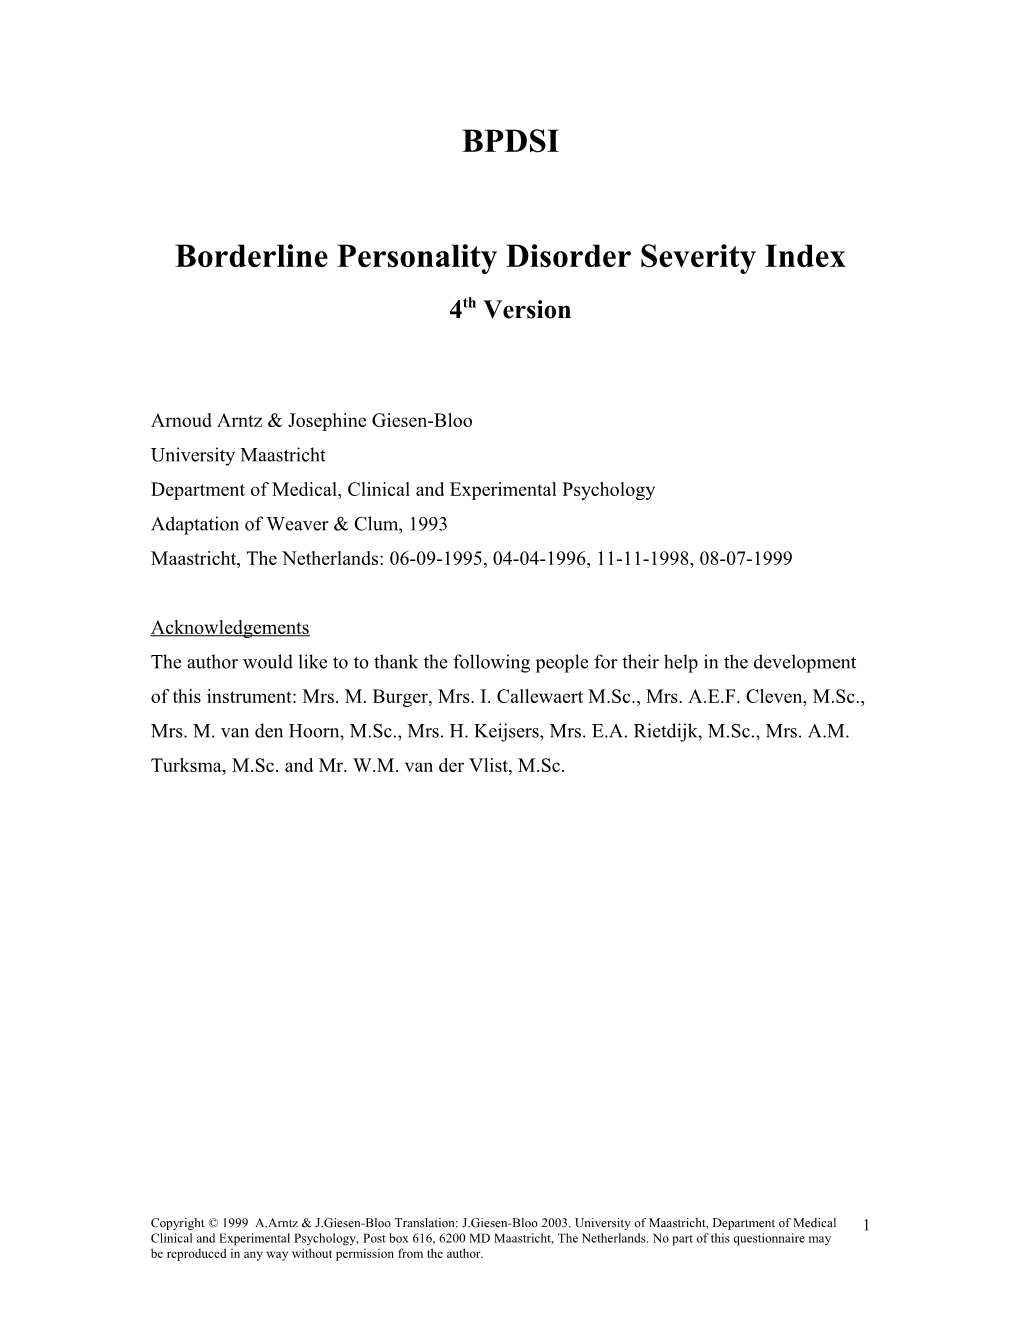 Borderline Personality Disorder Severity Index